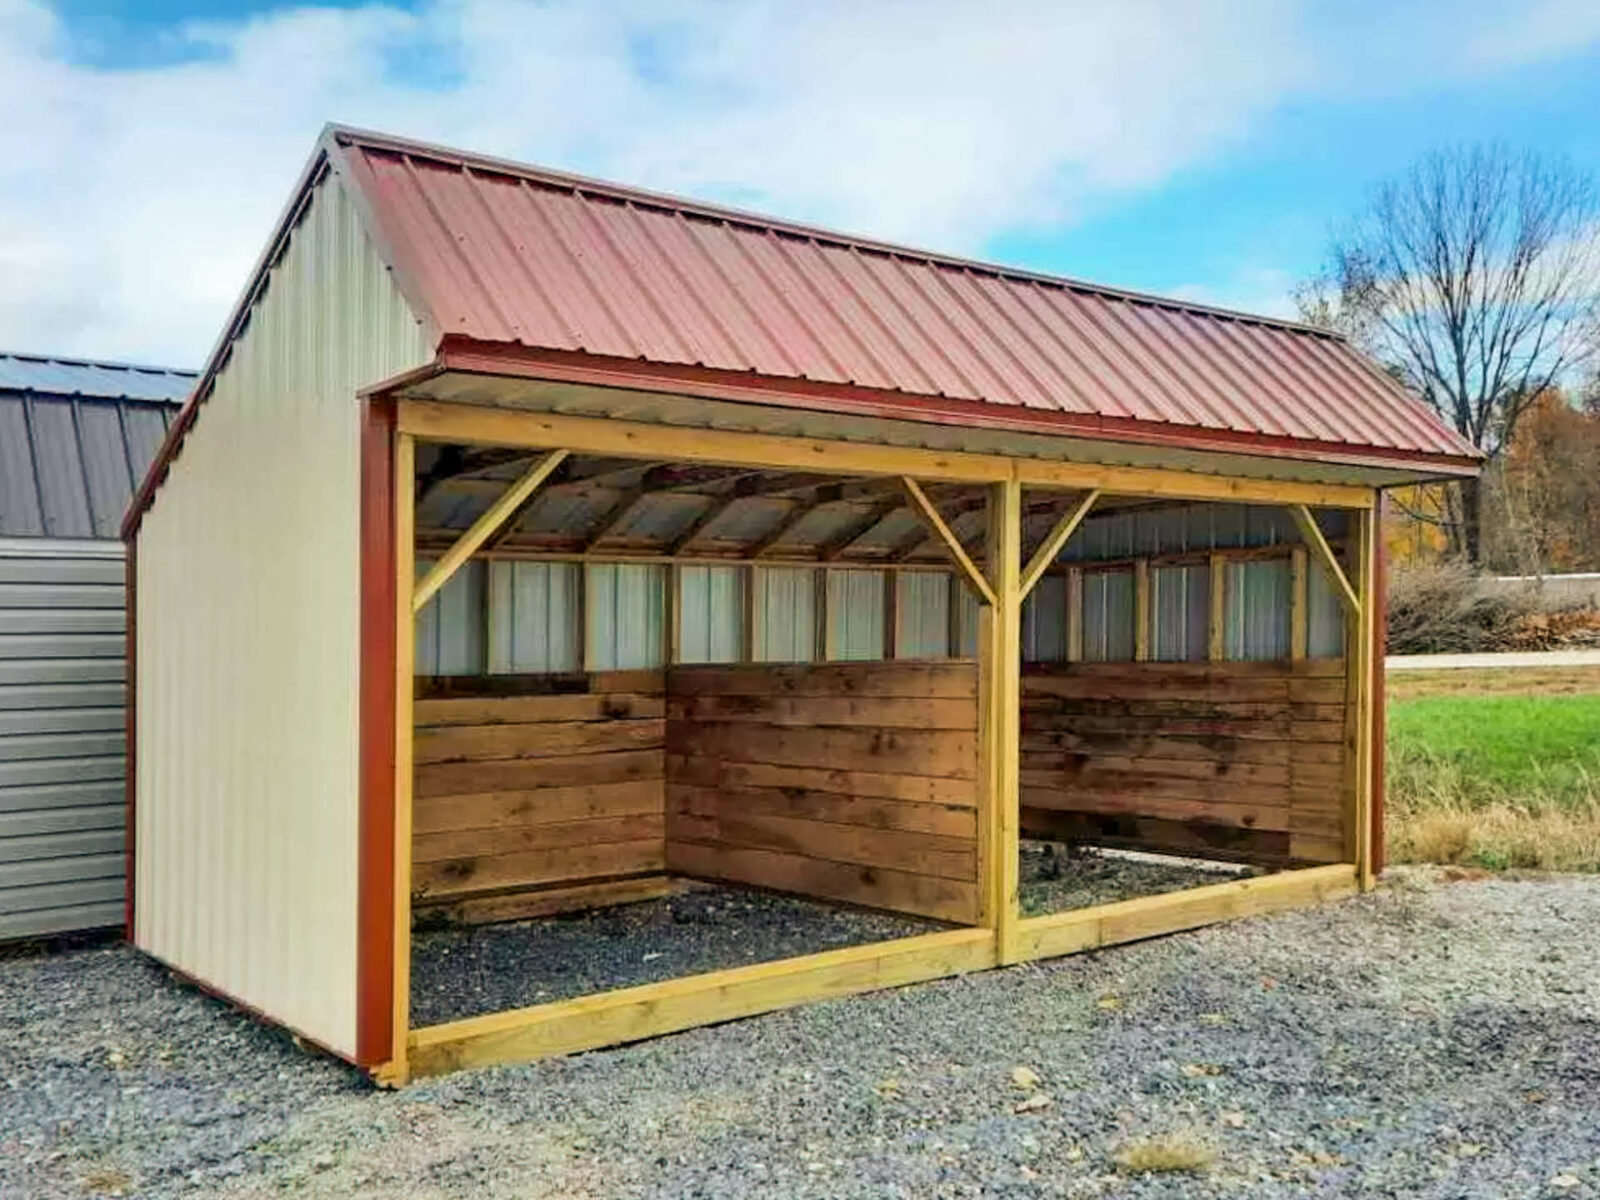 A small horse barn with metal siding and roofing.